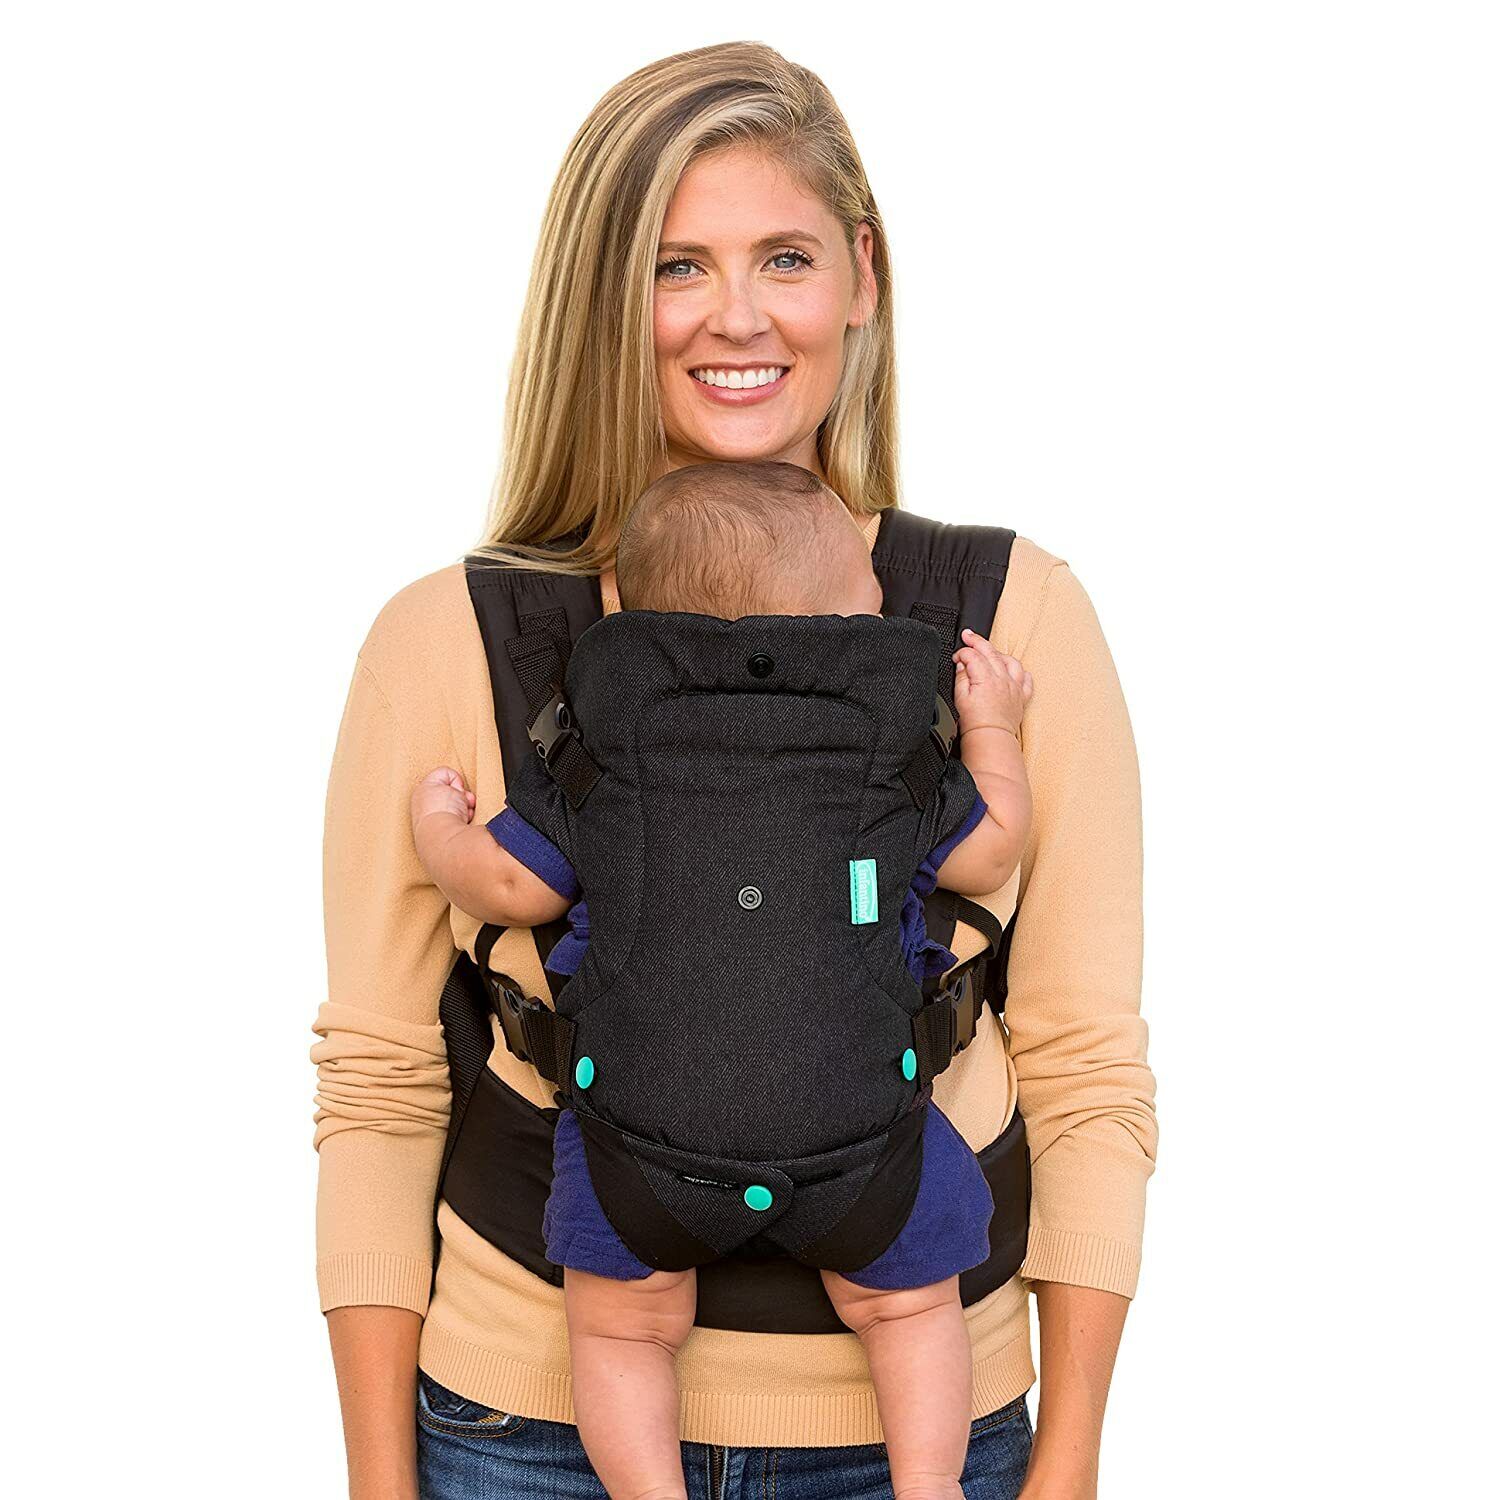 Infantino Flip 4-in-1 Carrier - Ergonomic, Convertible, face in-out NEW FREESHIP Unbranded Does Not Apply - фотография #6